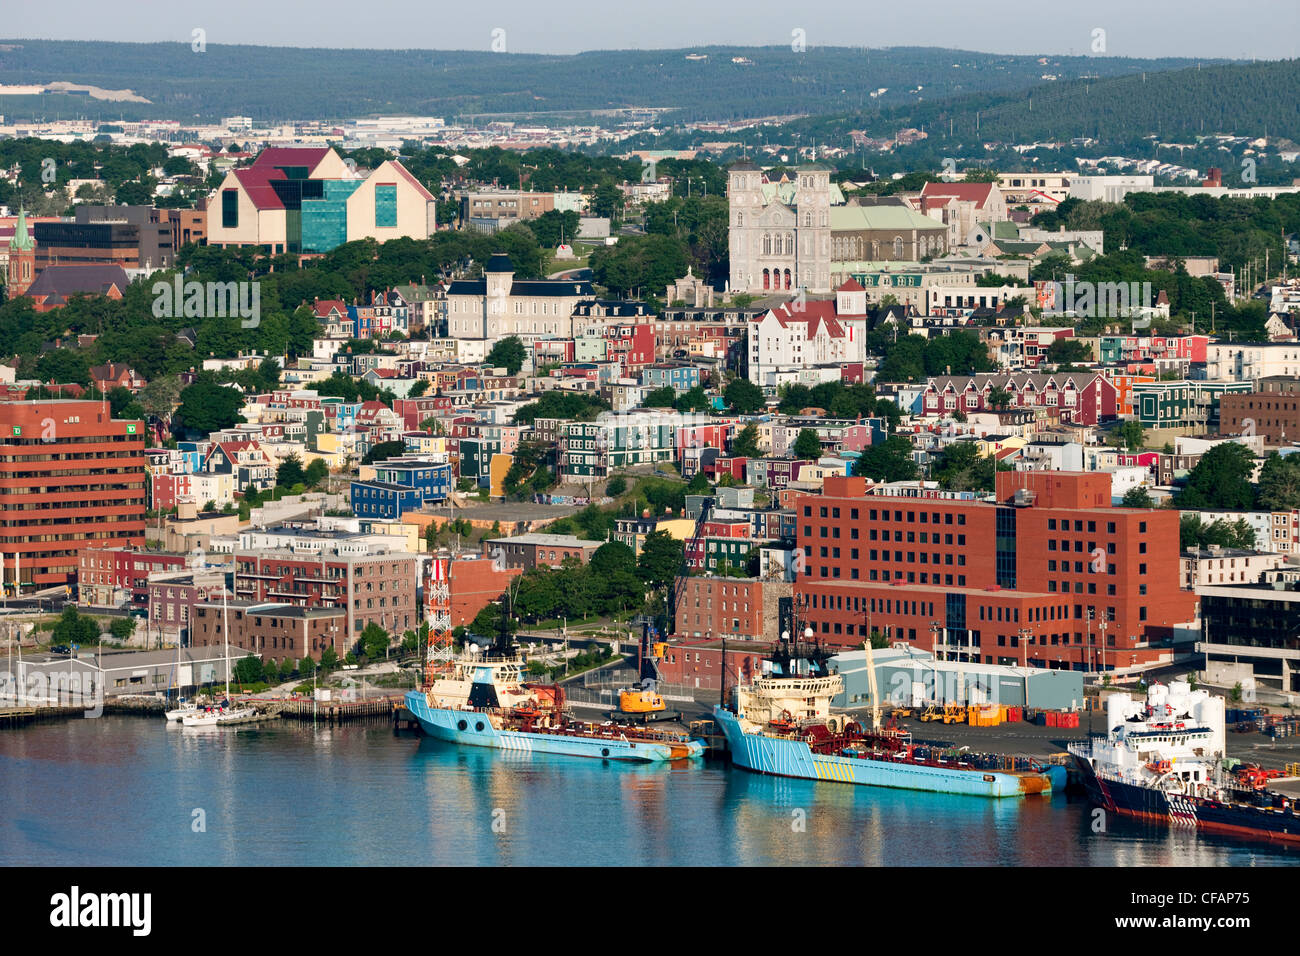 View of harbour and waterfront, St. John's, Newfoundland and Labrador, Canada. Stock Photo